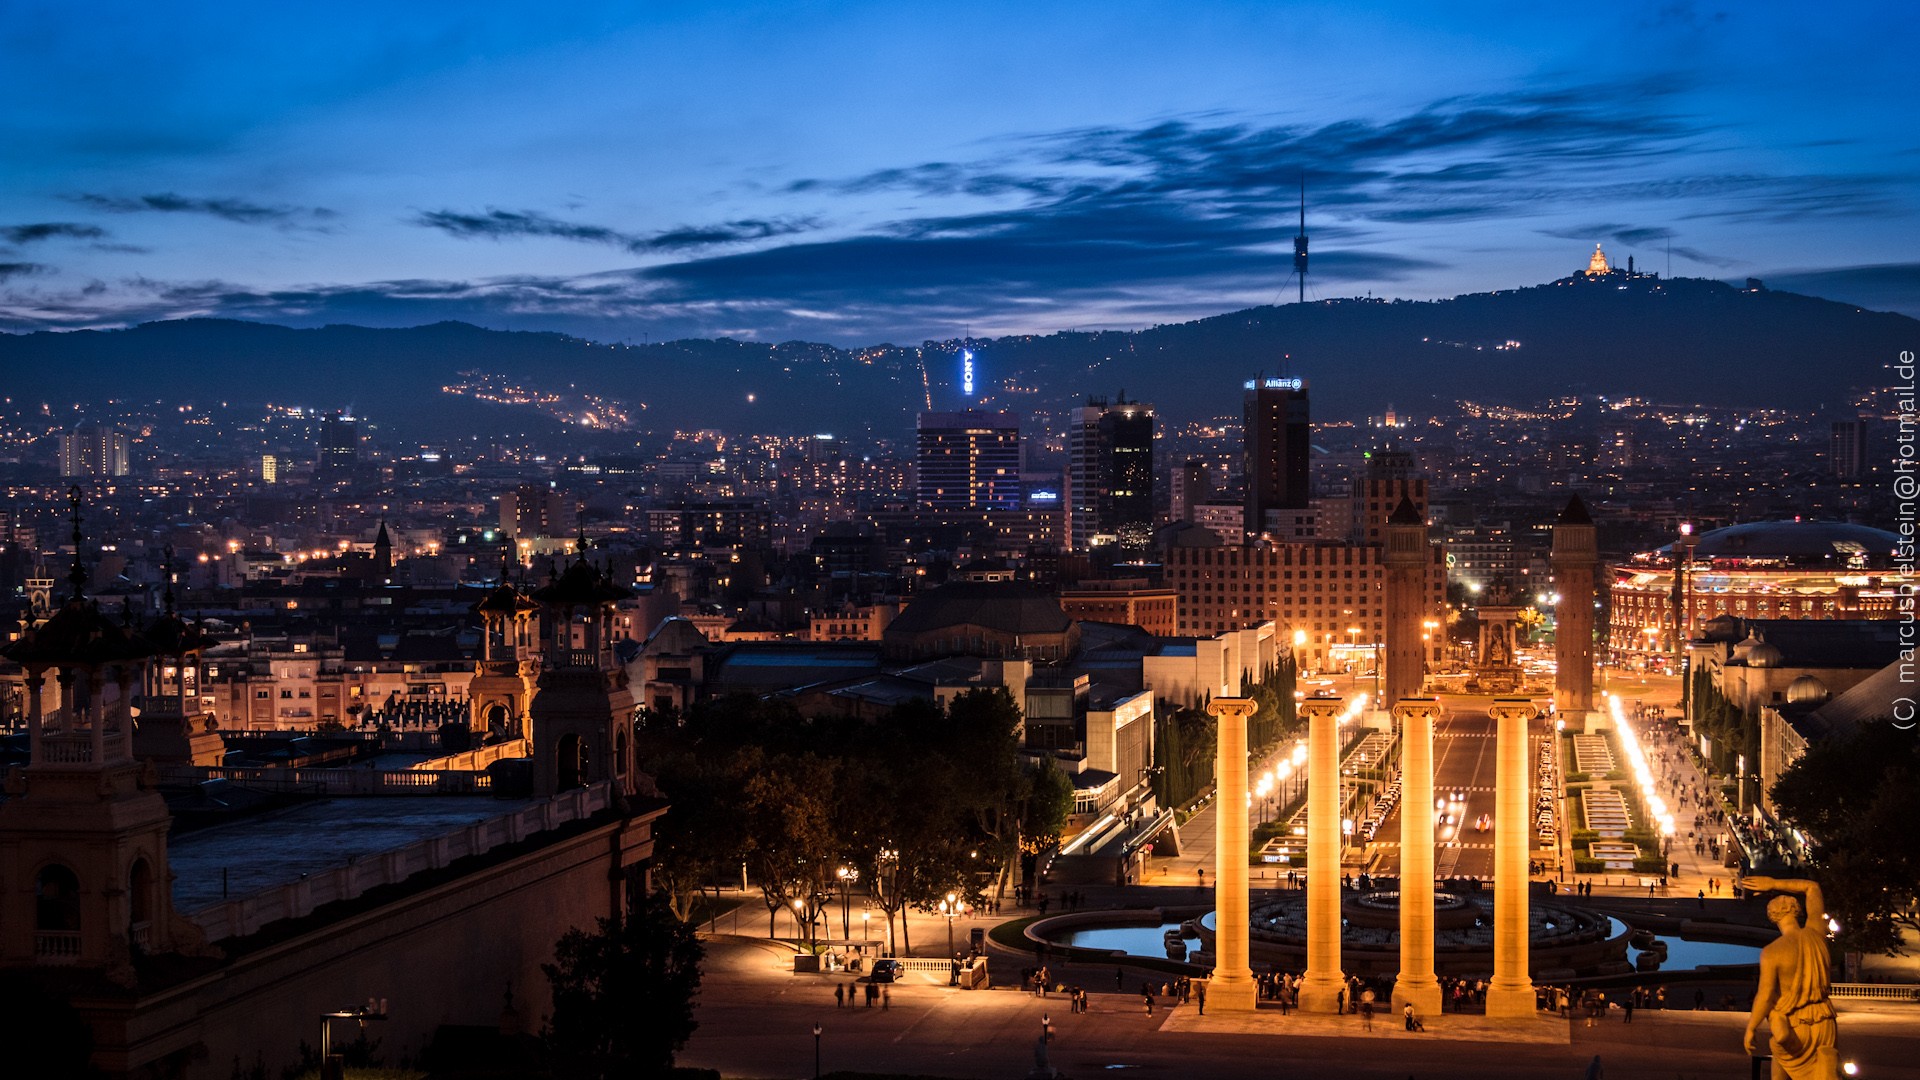 Barcelona When Night Come Photo And Picture Sharing